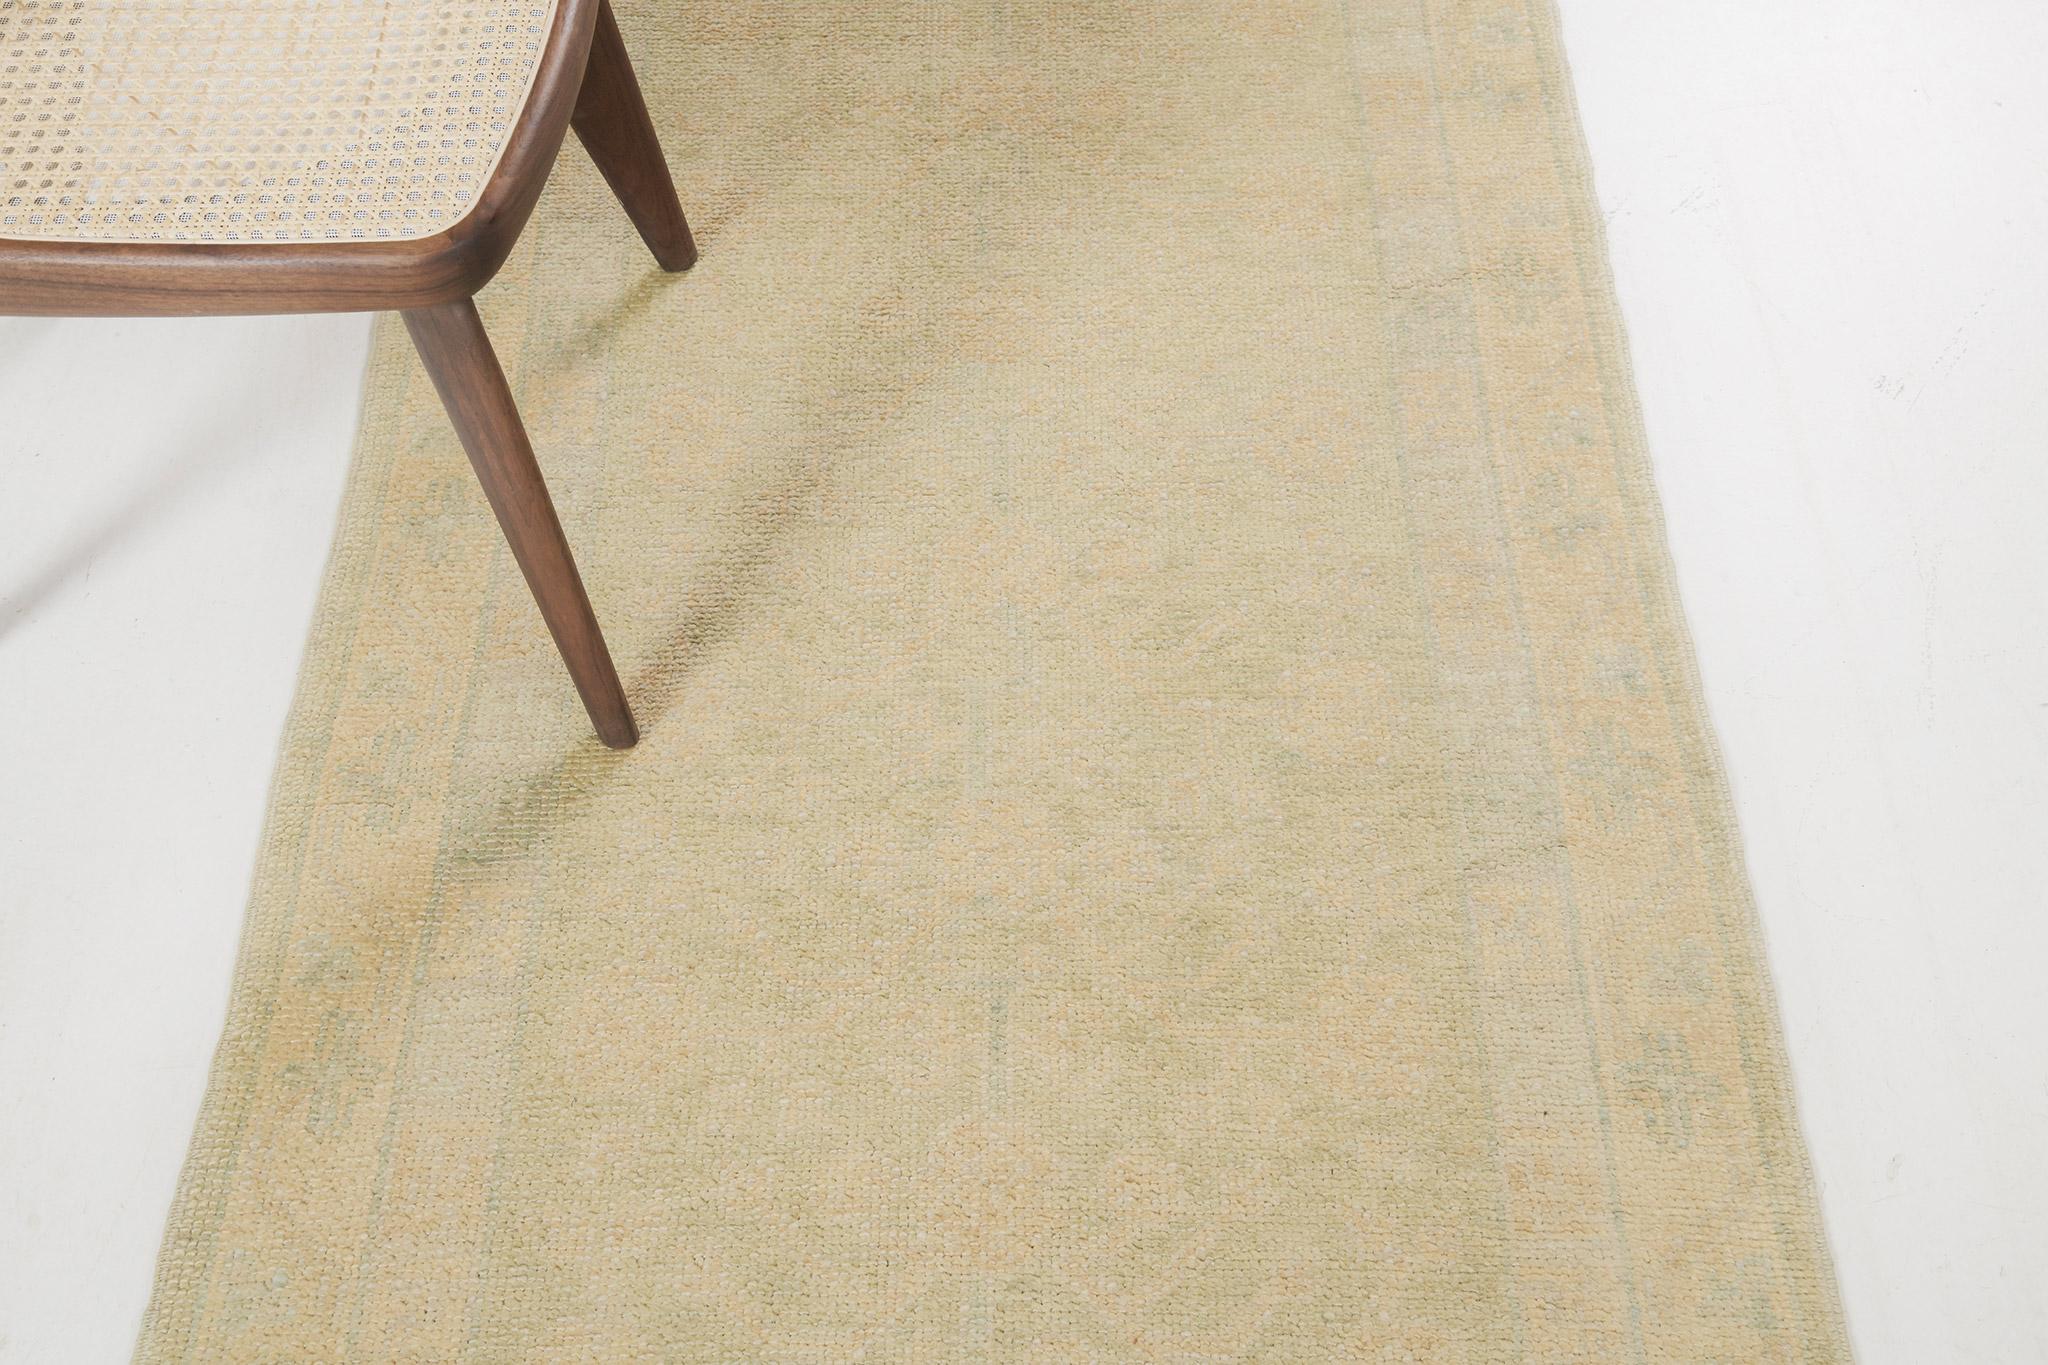 Soft tones of gold, green, and blue are exceptionally gorgeous that make your room simpler. What it makes more interesting is the complementing looping vine border and delicate symmetric design in this runner. This amazing runner will add an accent